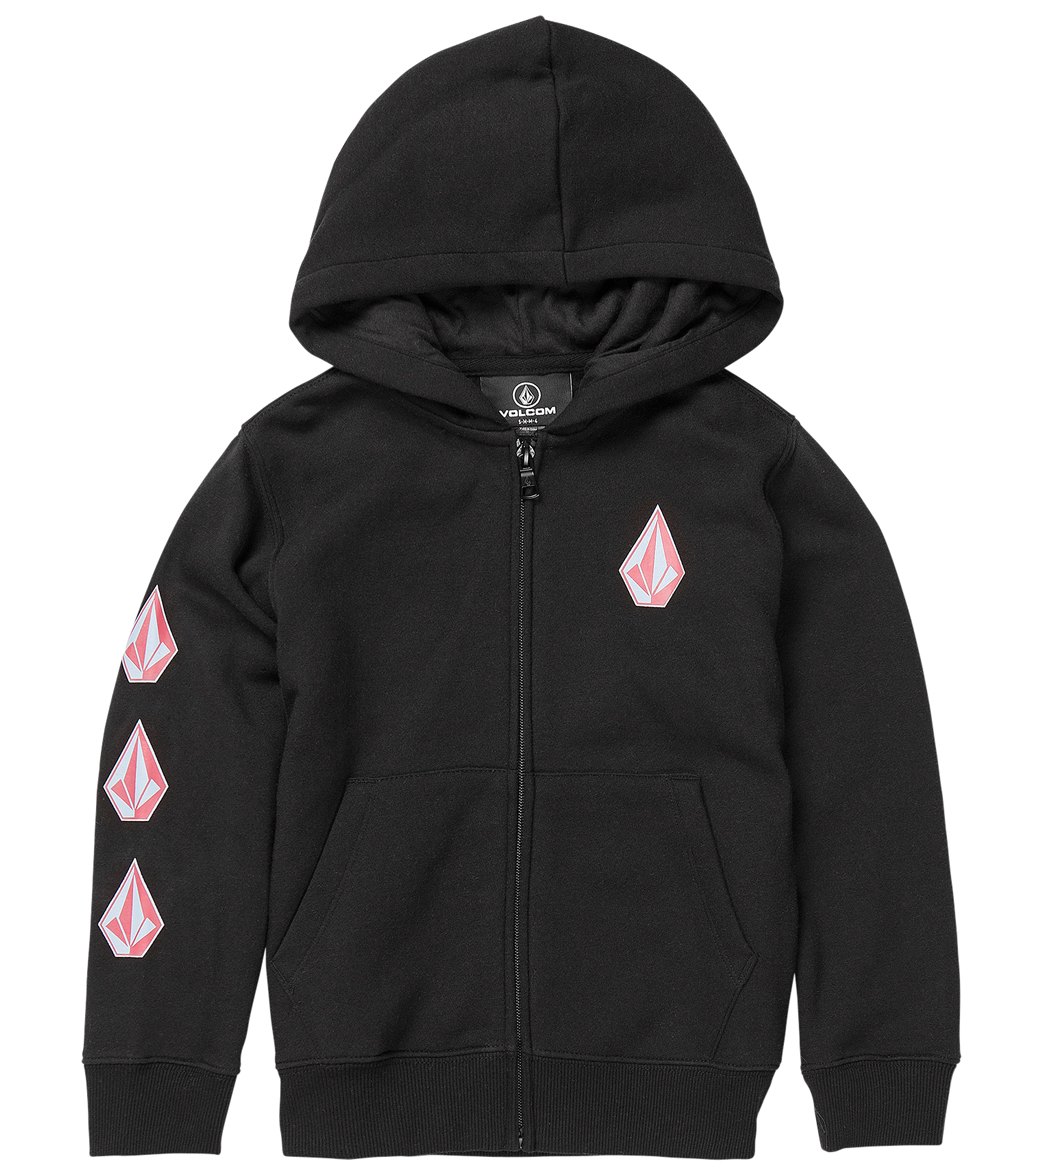 Volcom Boys' Iconic Stone Zip Hoodie Toddler - New Black 2T Cotton/Polyester - Swimoutlet.com